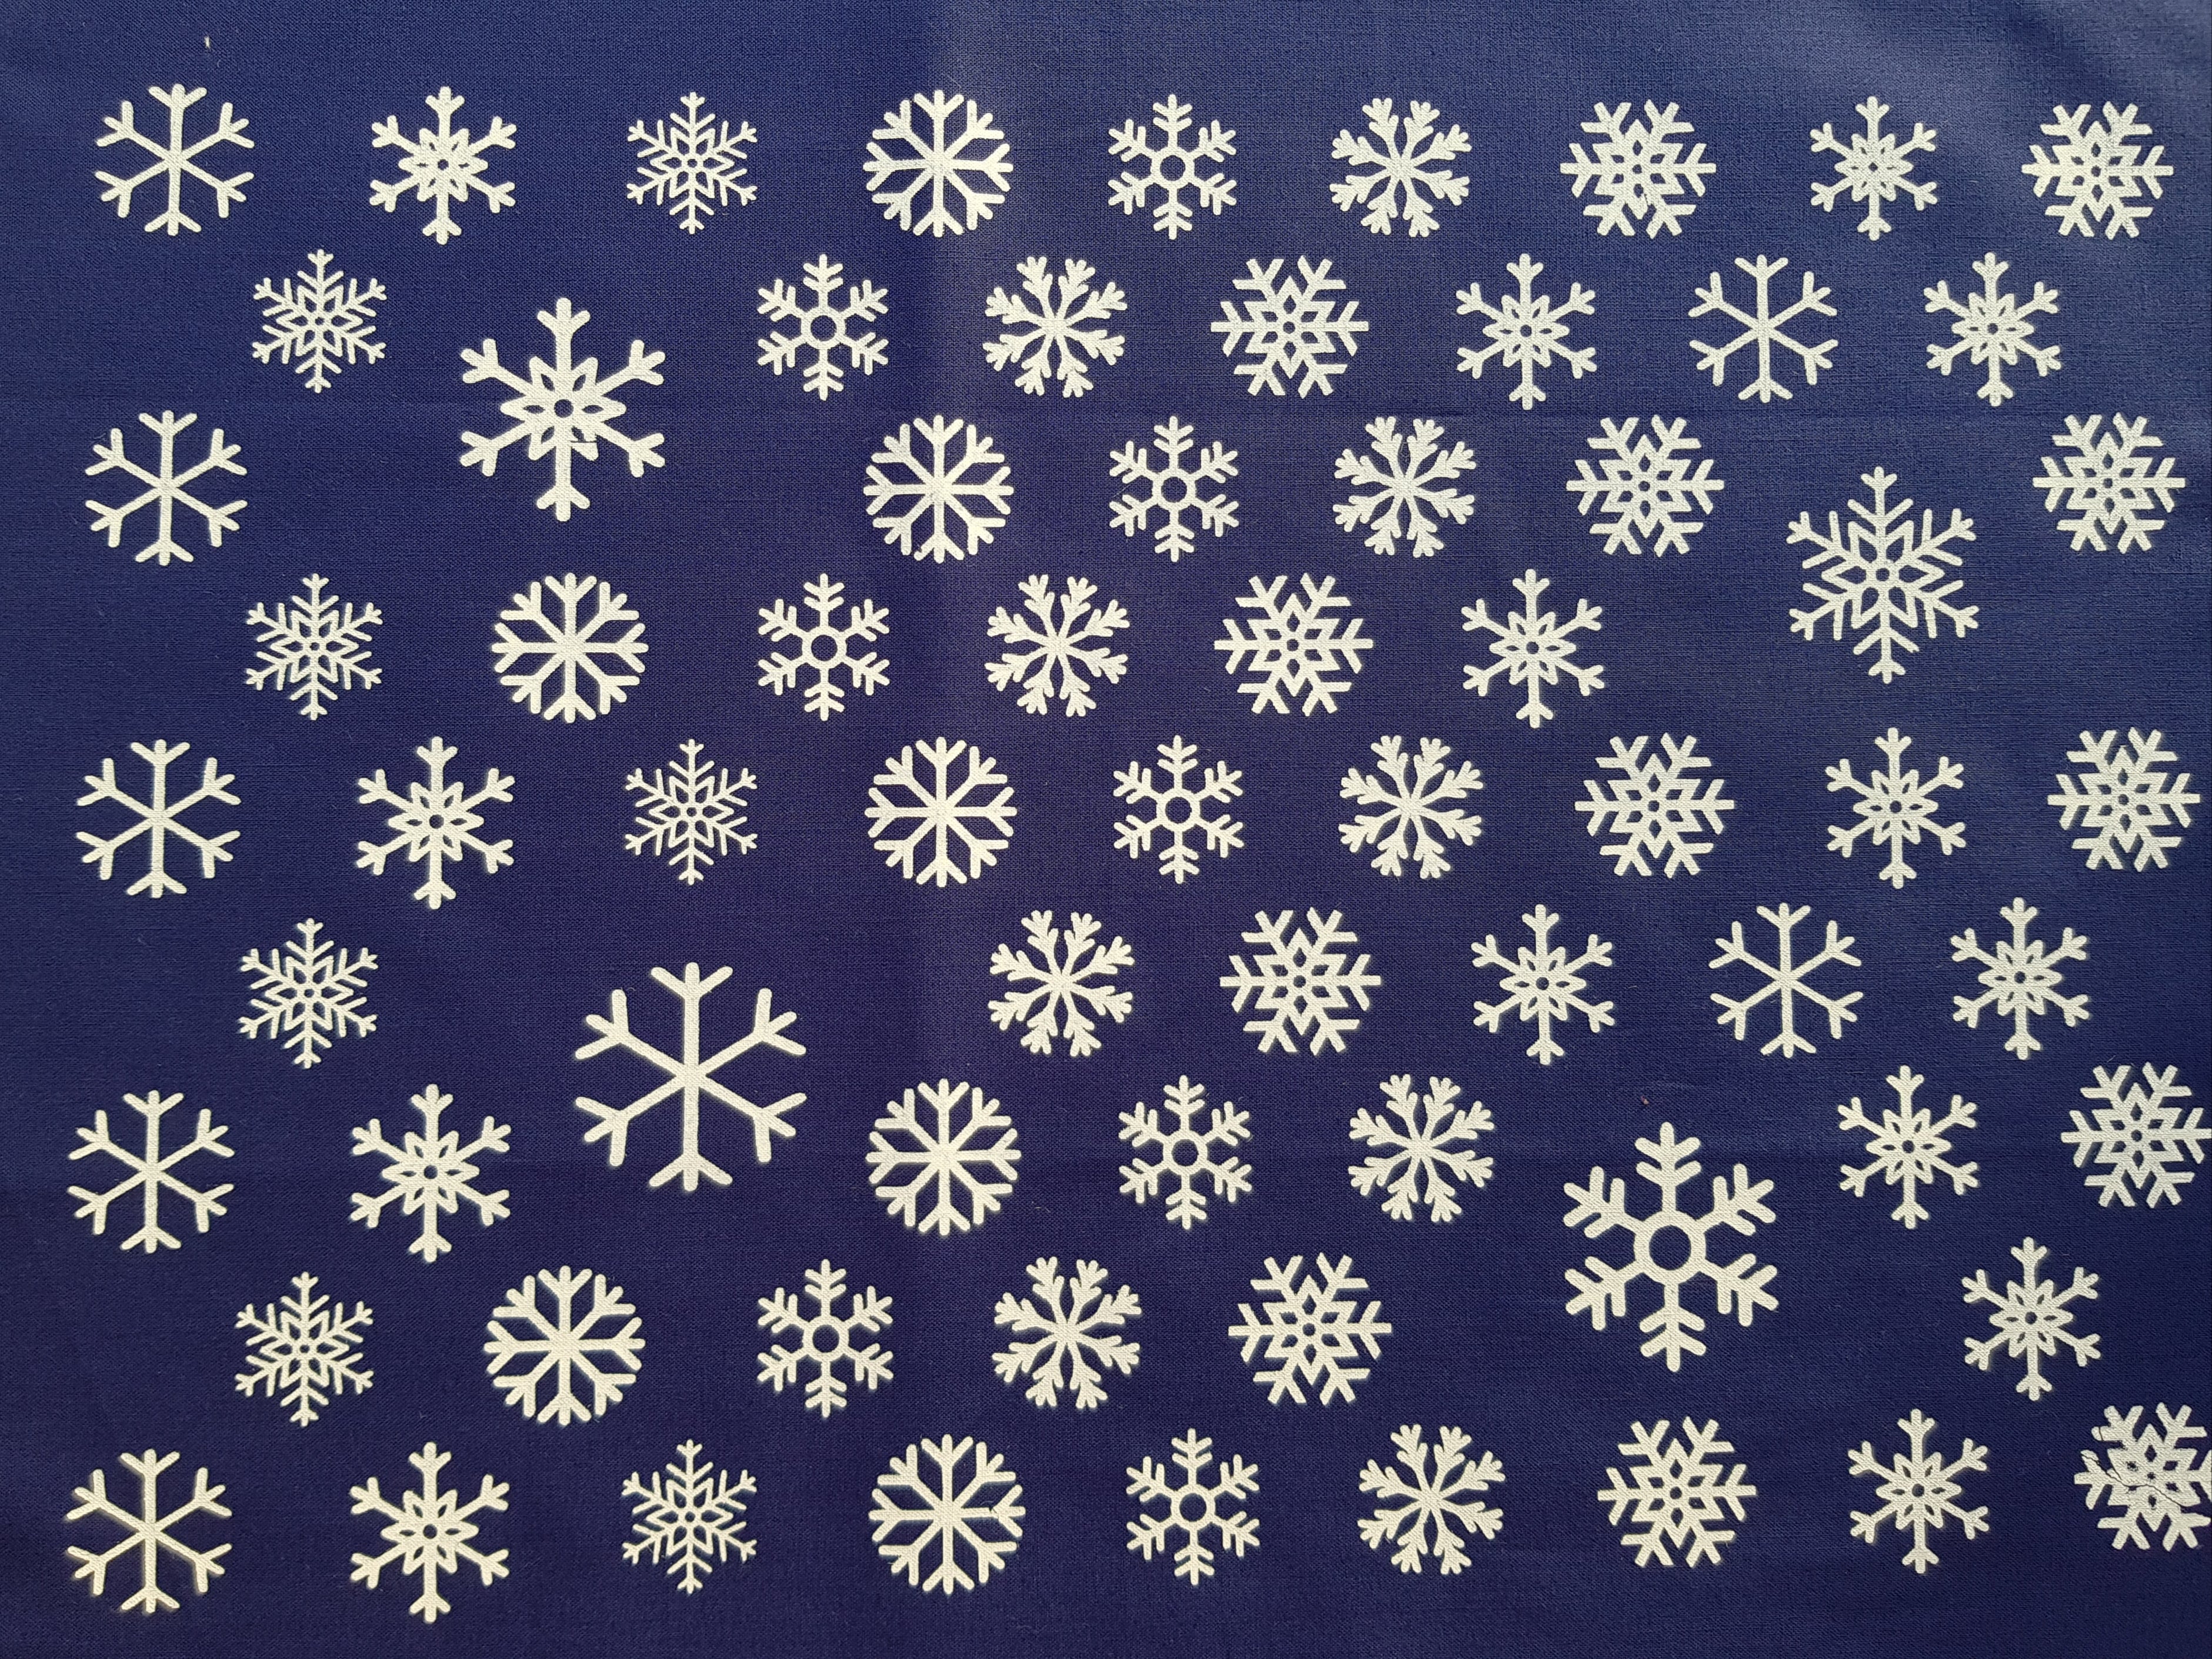 SNOWFLAKES - A Snowflake is not just for Christmas - Essex Linen Screen Printed Snowflake panels